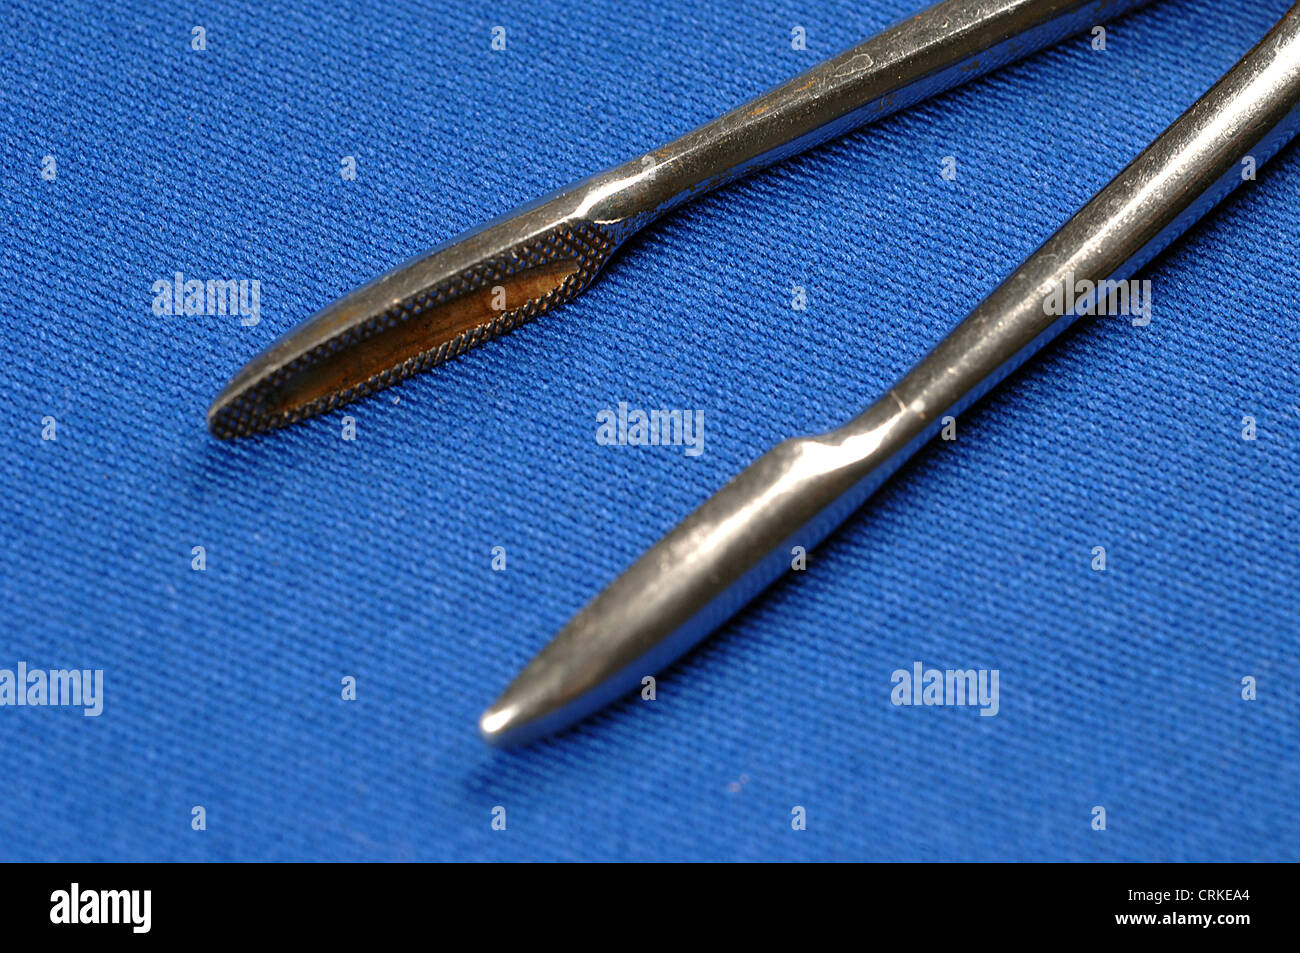 Gross-Maier dressing forceps; used to help dress a surgical wound by removing bits of tissue or foreign objects. Stock Photo